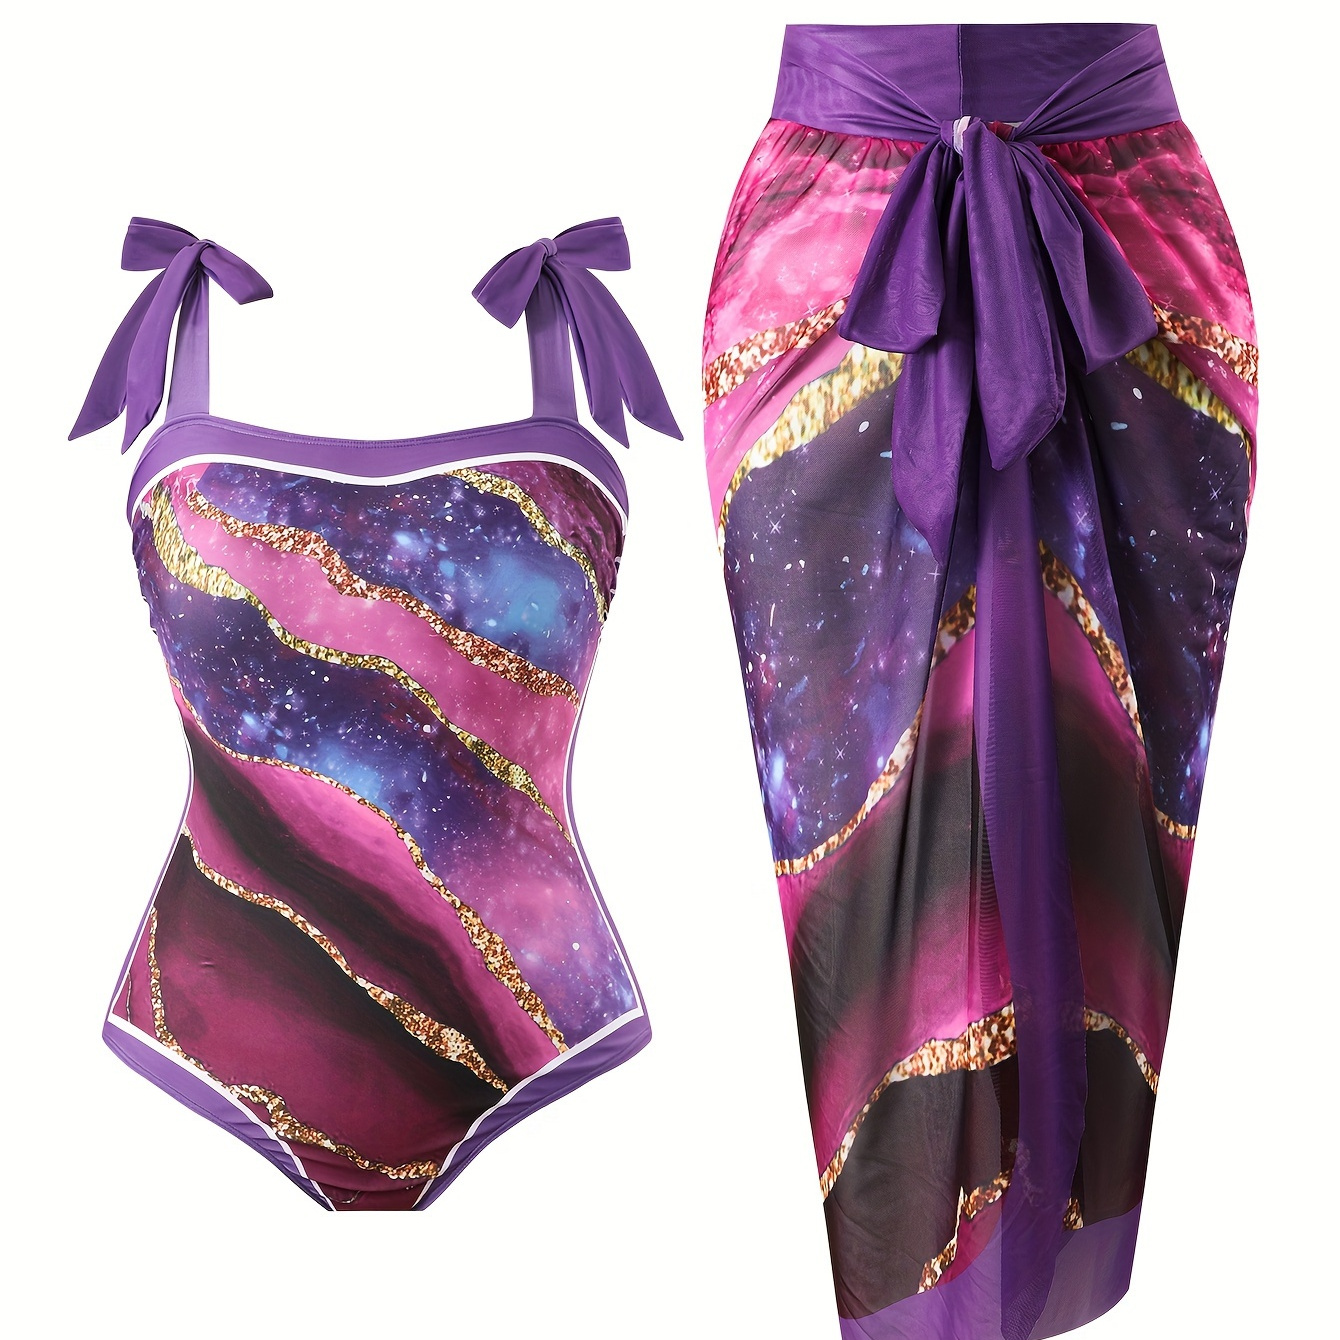 

Women's Plus Size Fashion One-piece Swimsuit With Beach Skirt, Conservative Style, Galaxy Print With Golden Accents, Swimwear With Shoulder Ties